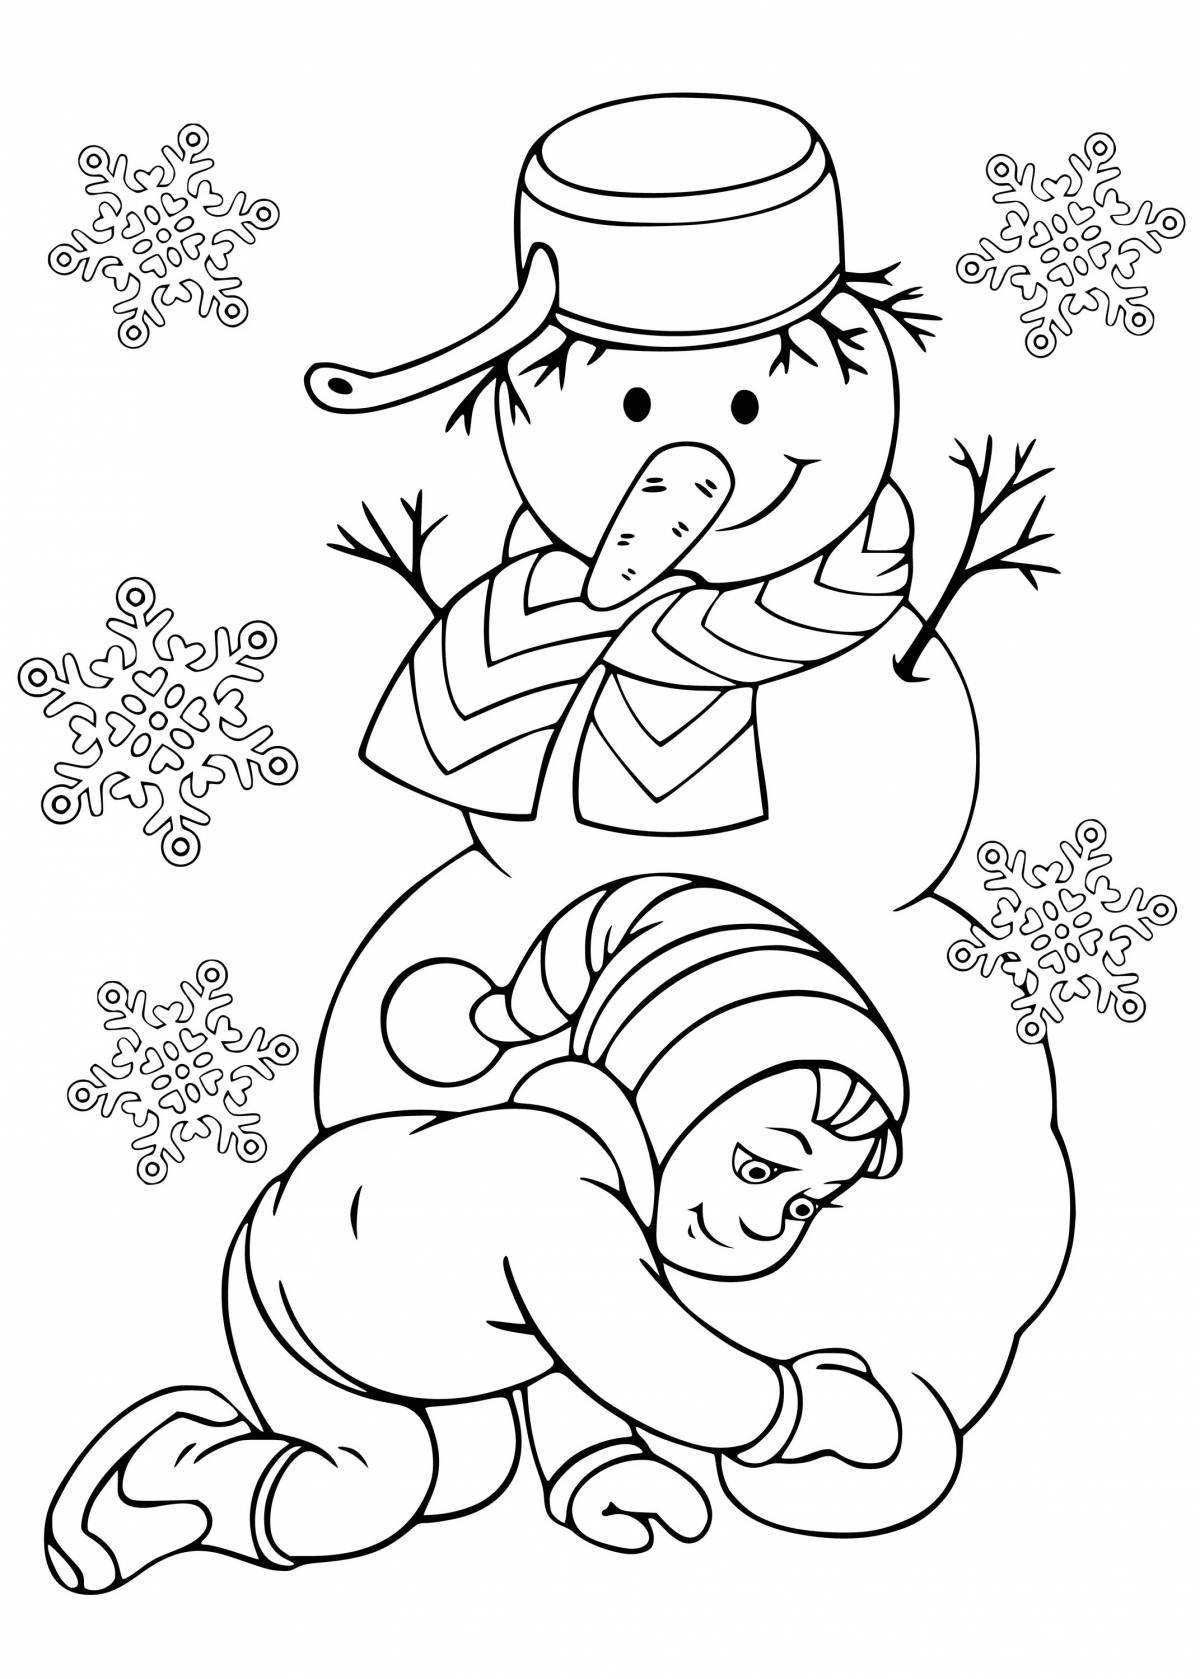 Coloring page sparkling snowman girl